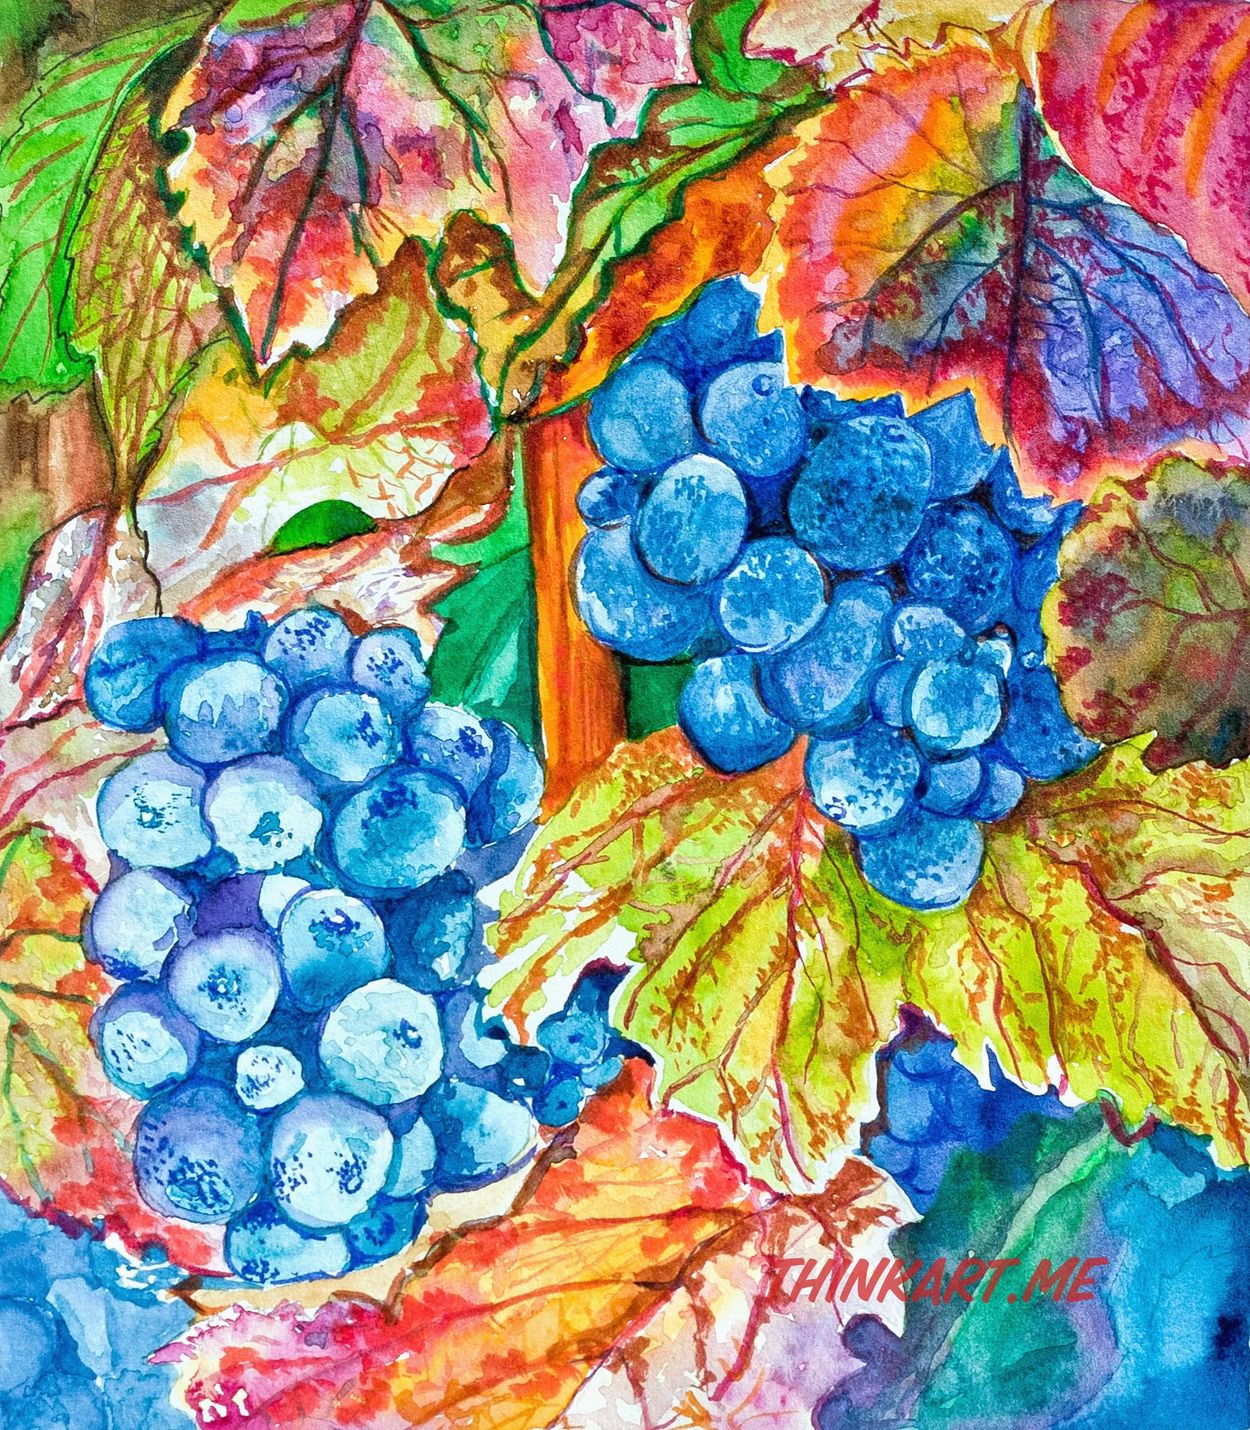 Grapes with Leaves
Medium - Watercolor
Dimensions- 8”x10”